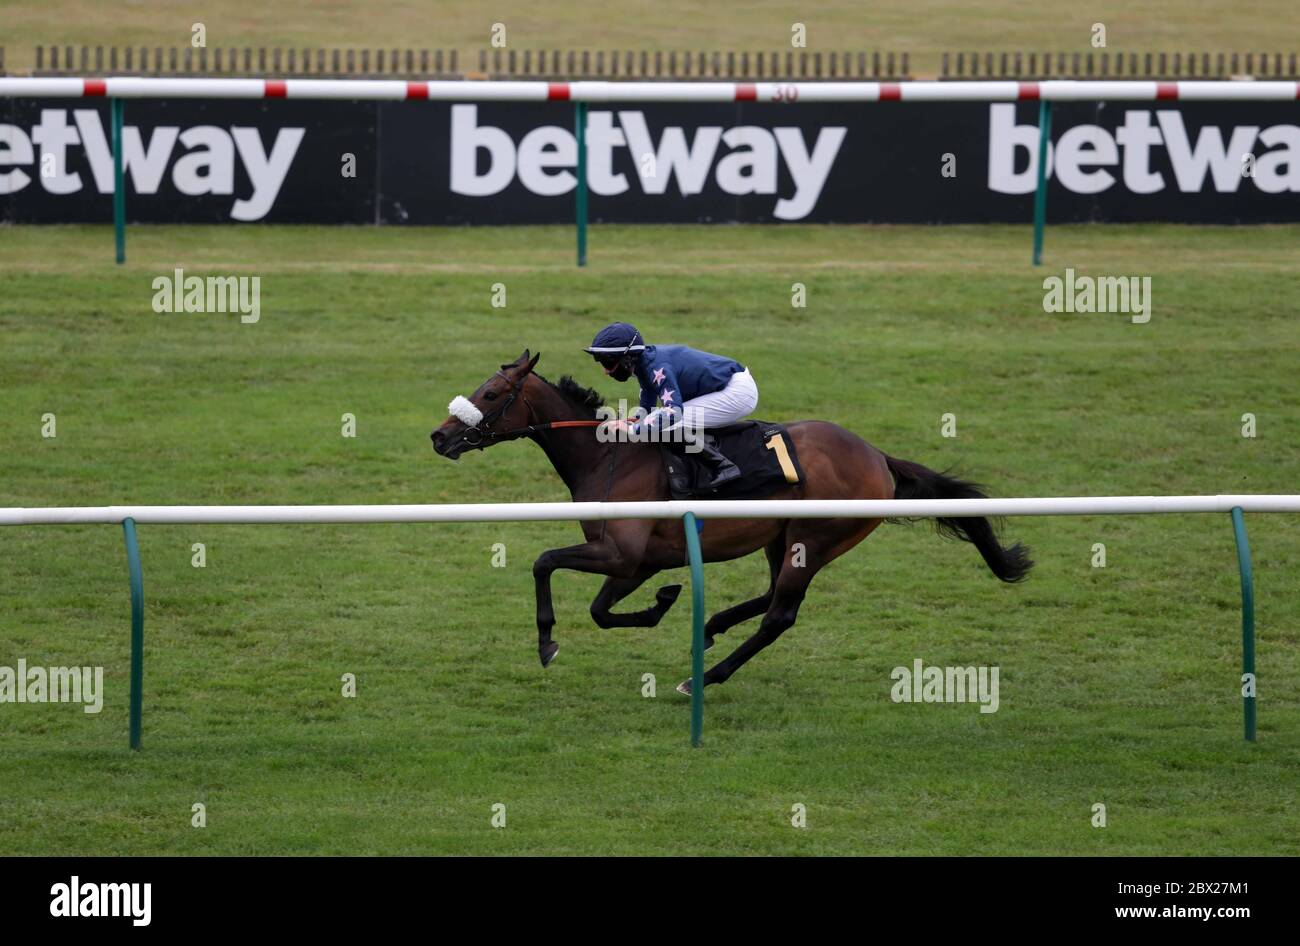 Bungee Jump ridden by Rossa Ryan wins the Play 4 To Win At Betway Handicap (Div 2) at Newmarket Racecourse. Stock Photo